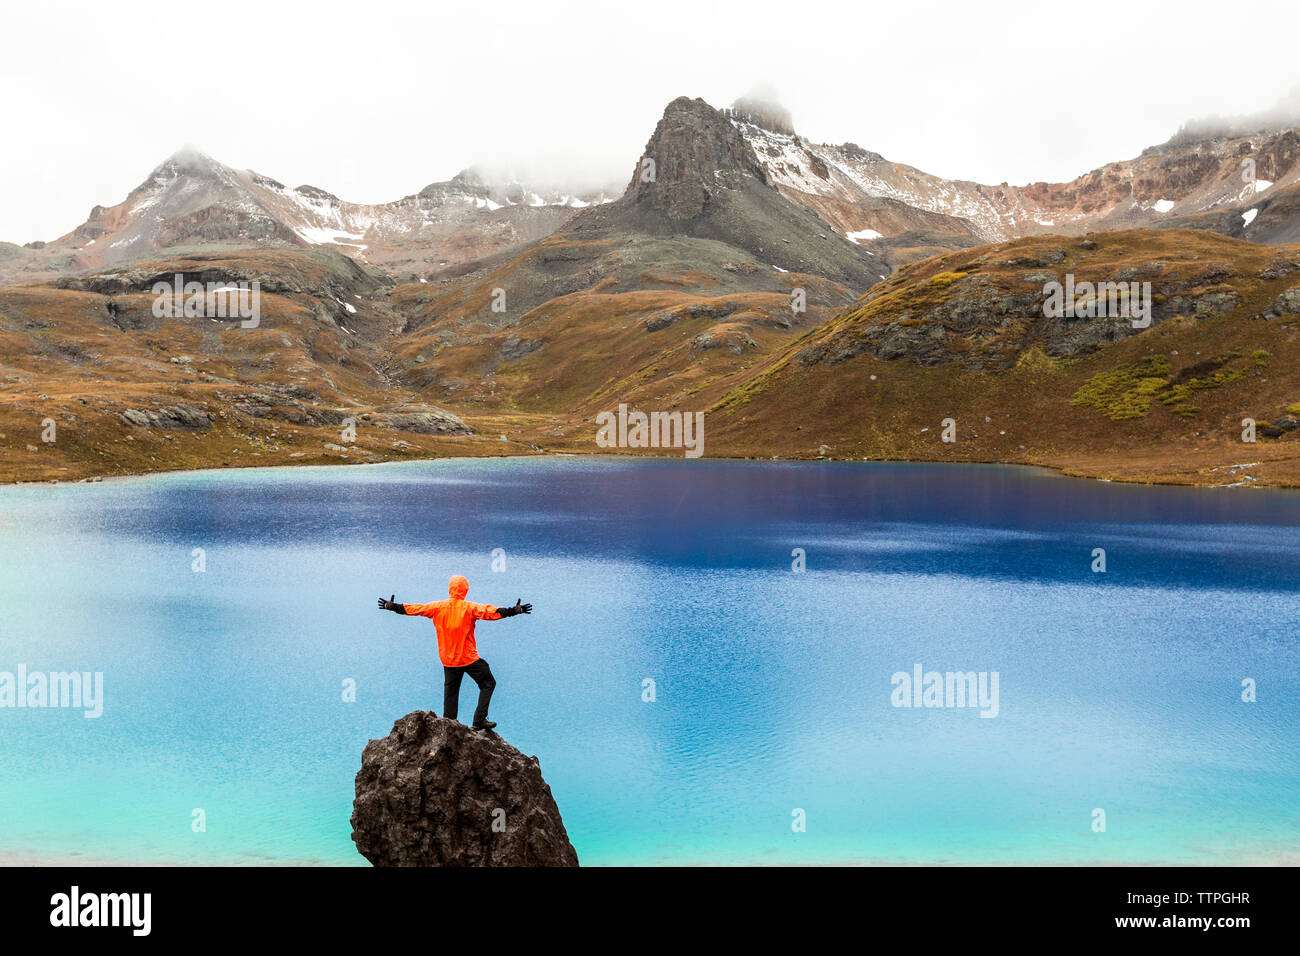 Rear view of man standing on rock against lake Stock Photo